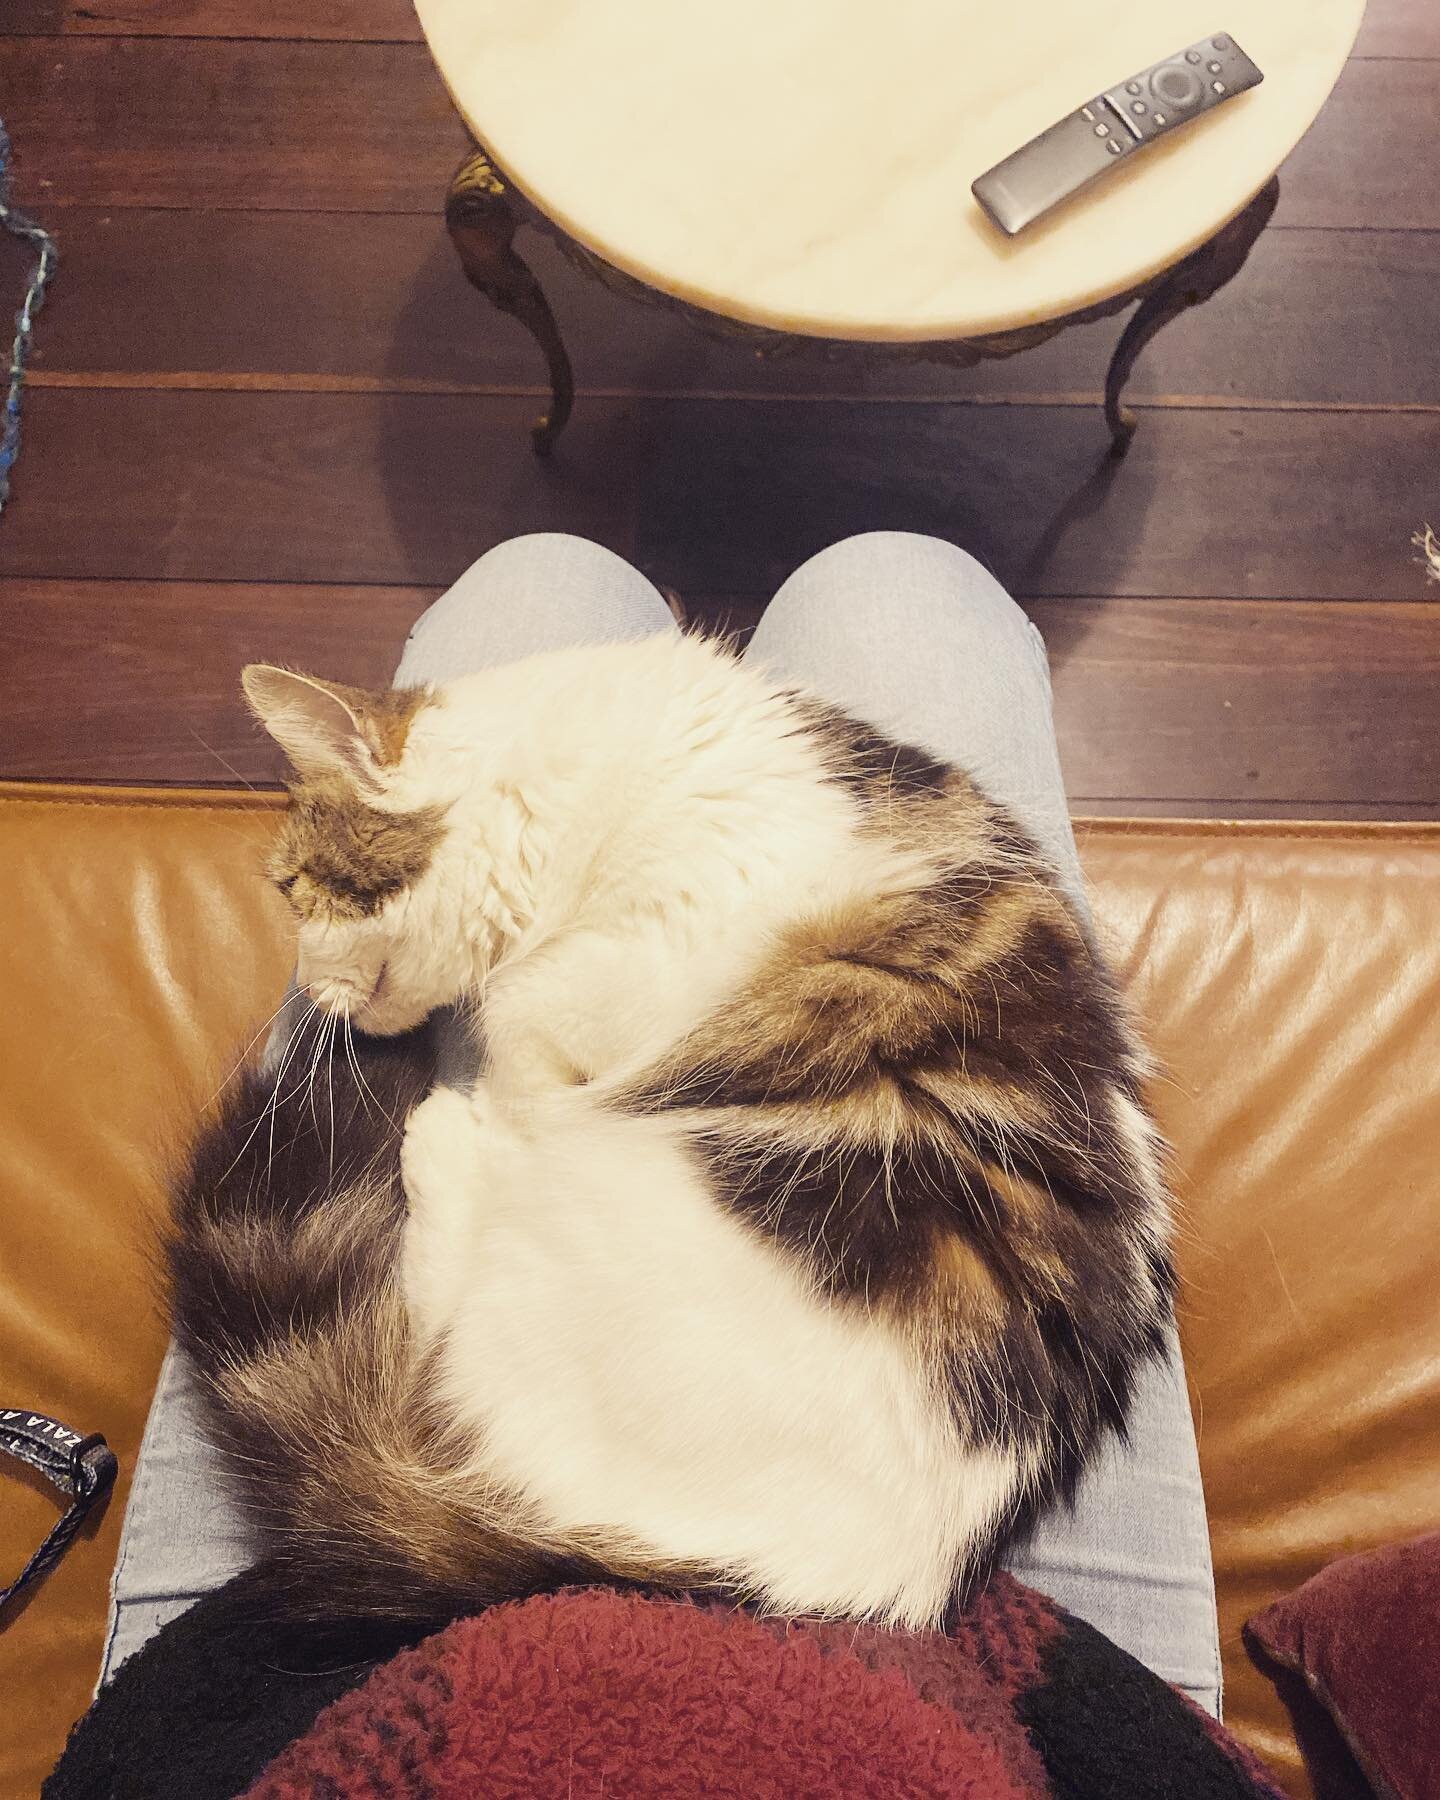 Whether you are after a visit once or twice a day for your four legged fluff ball you can rest assured that your little one is getting well taken care of.

Tilly here is enjoying some post dinner cuddles which is basically a mandatory visit requireme